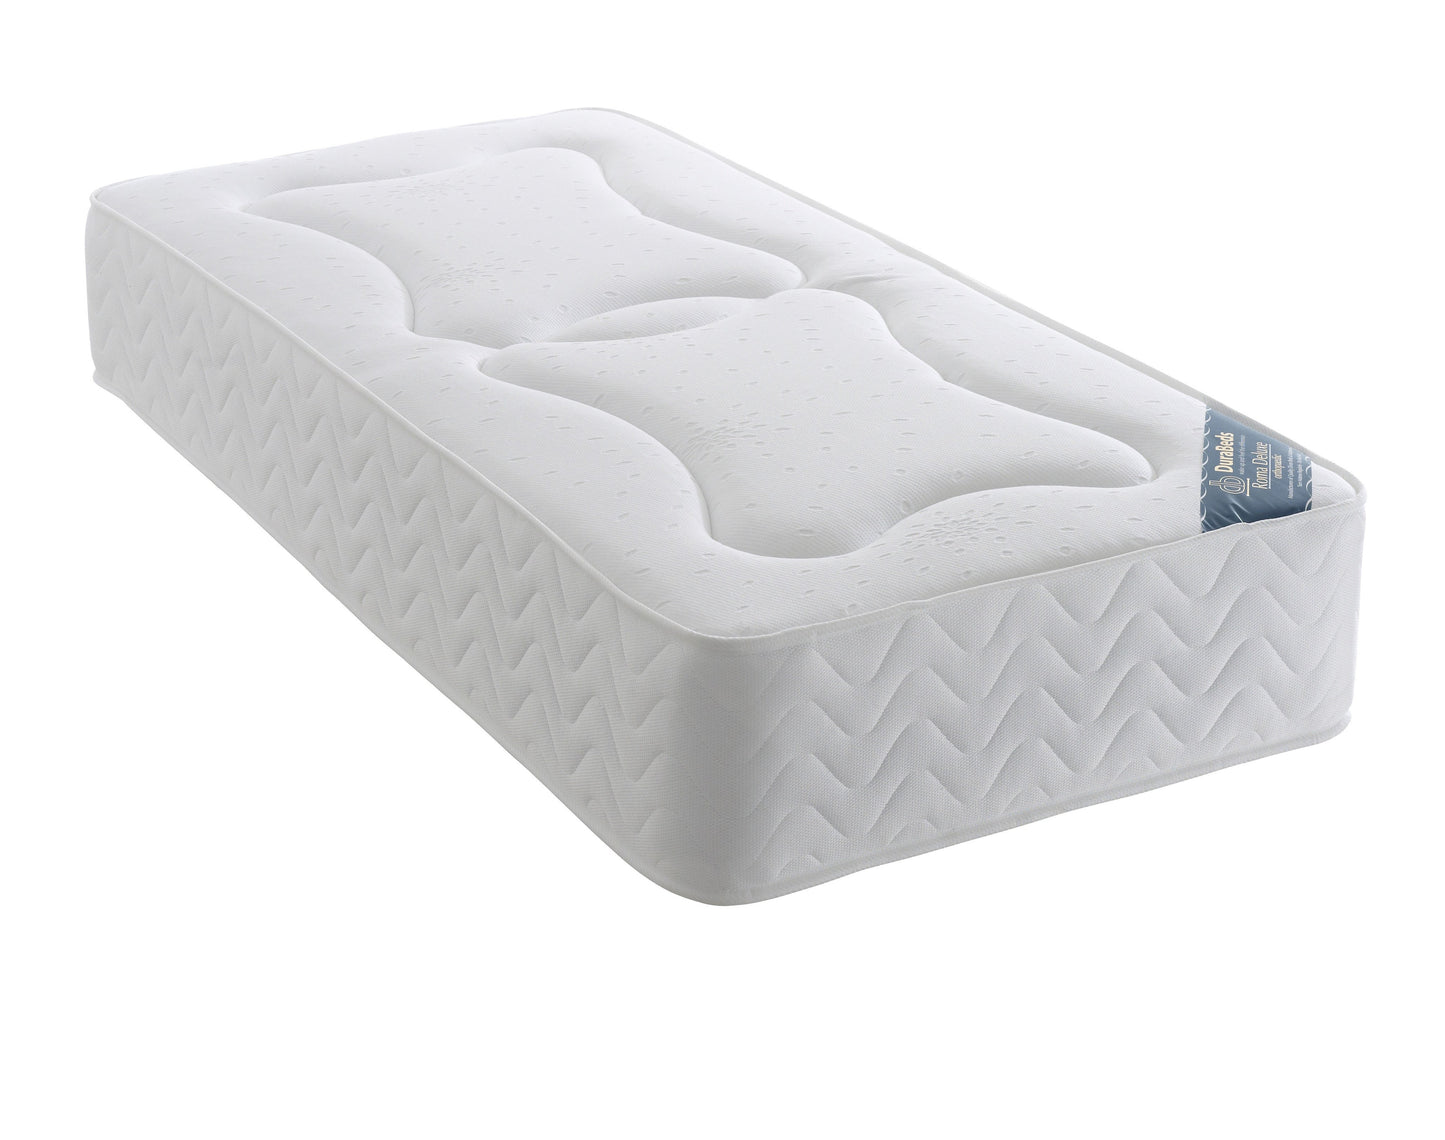 Roma Deluxe by Shop Beds